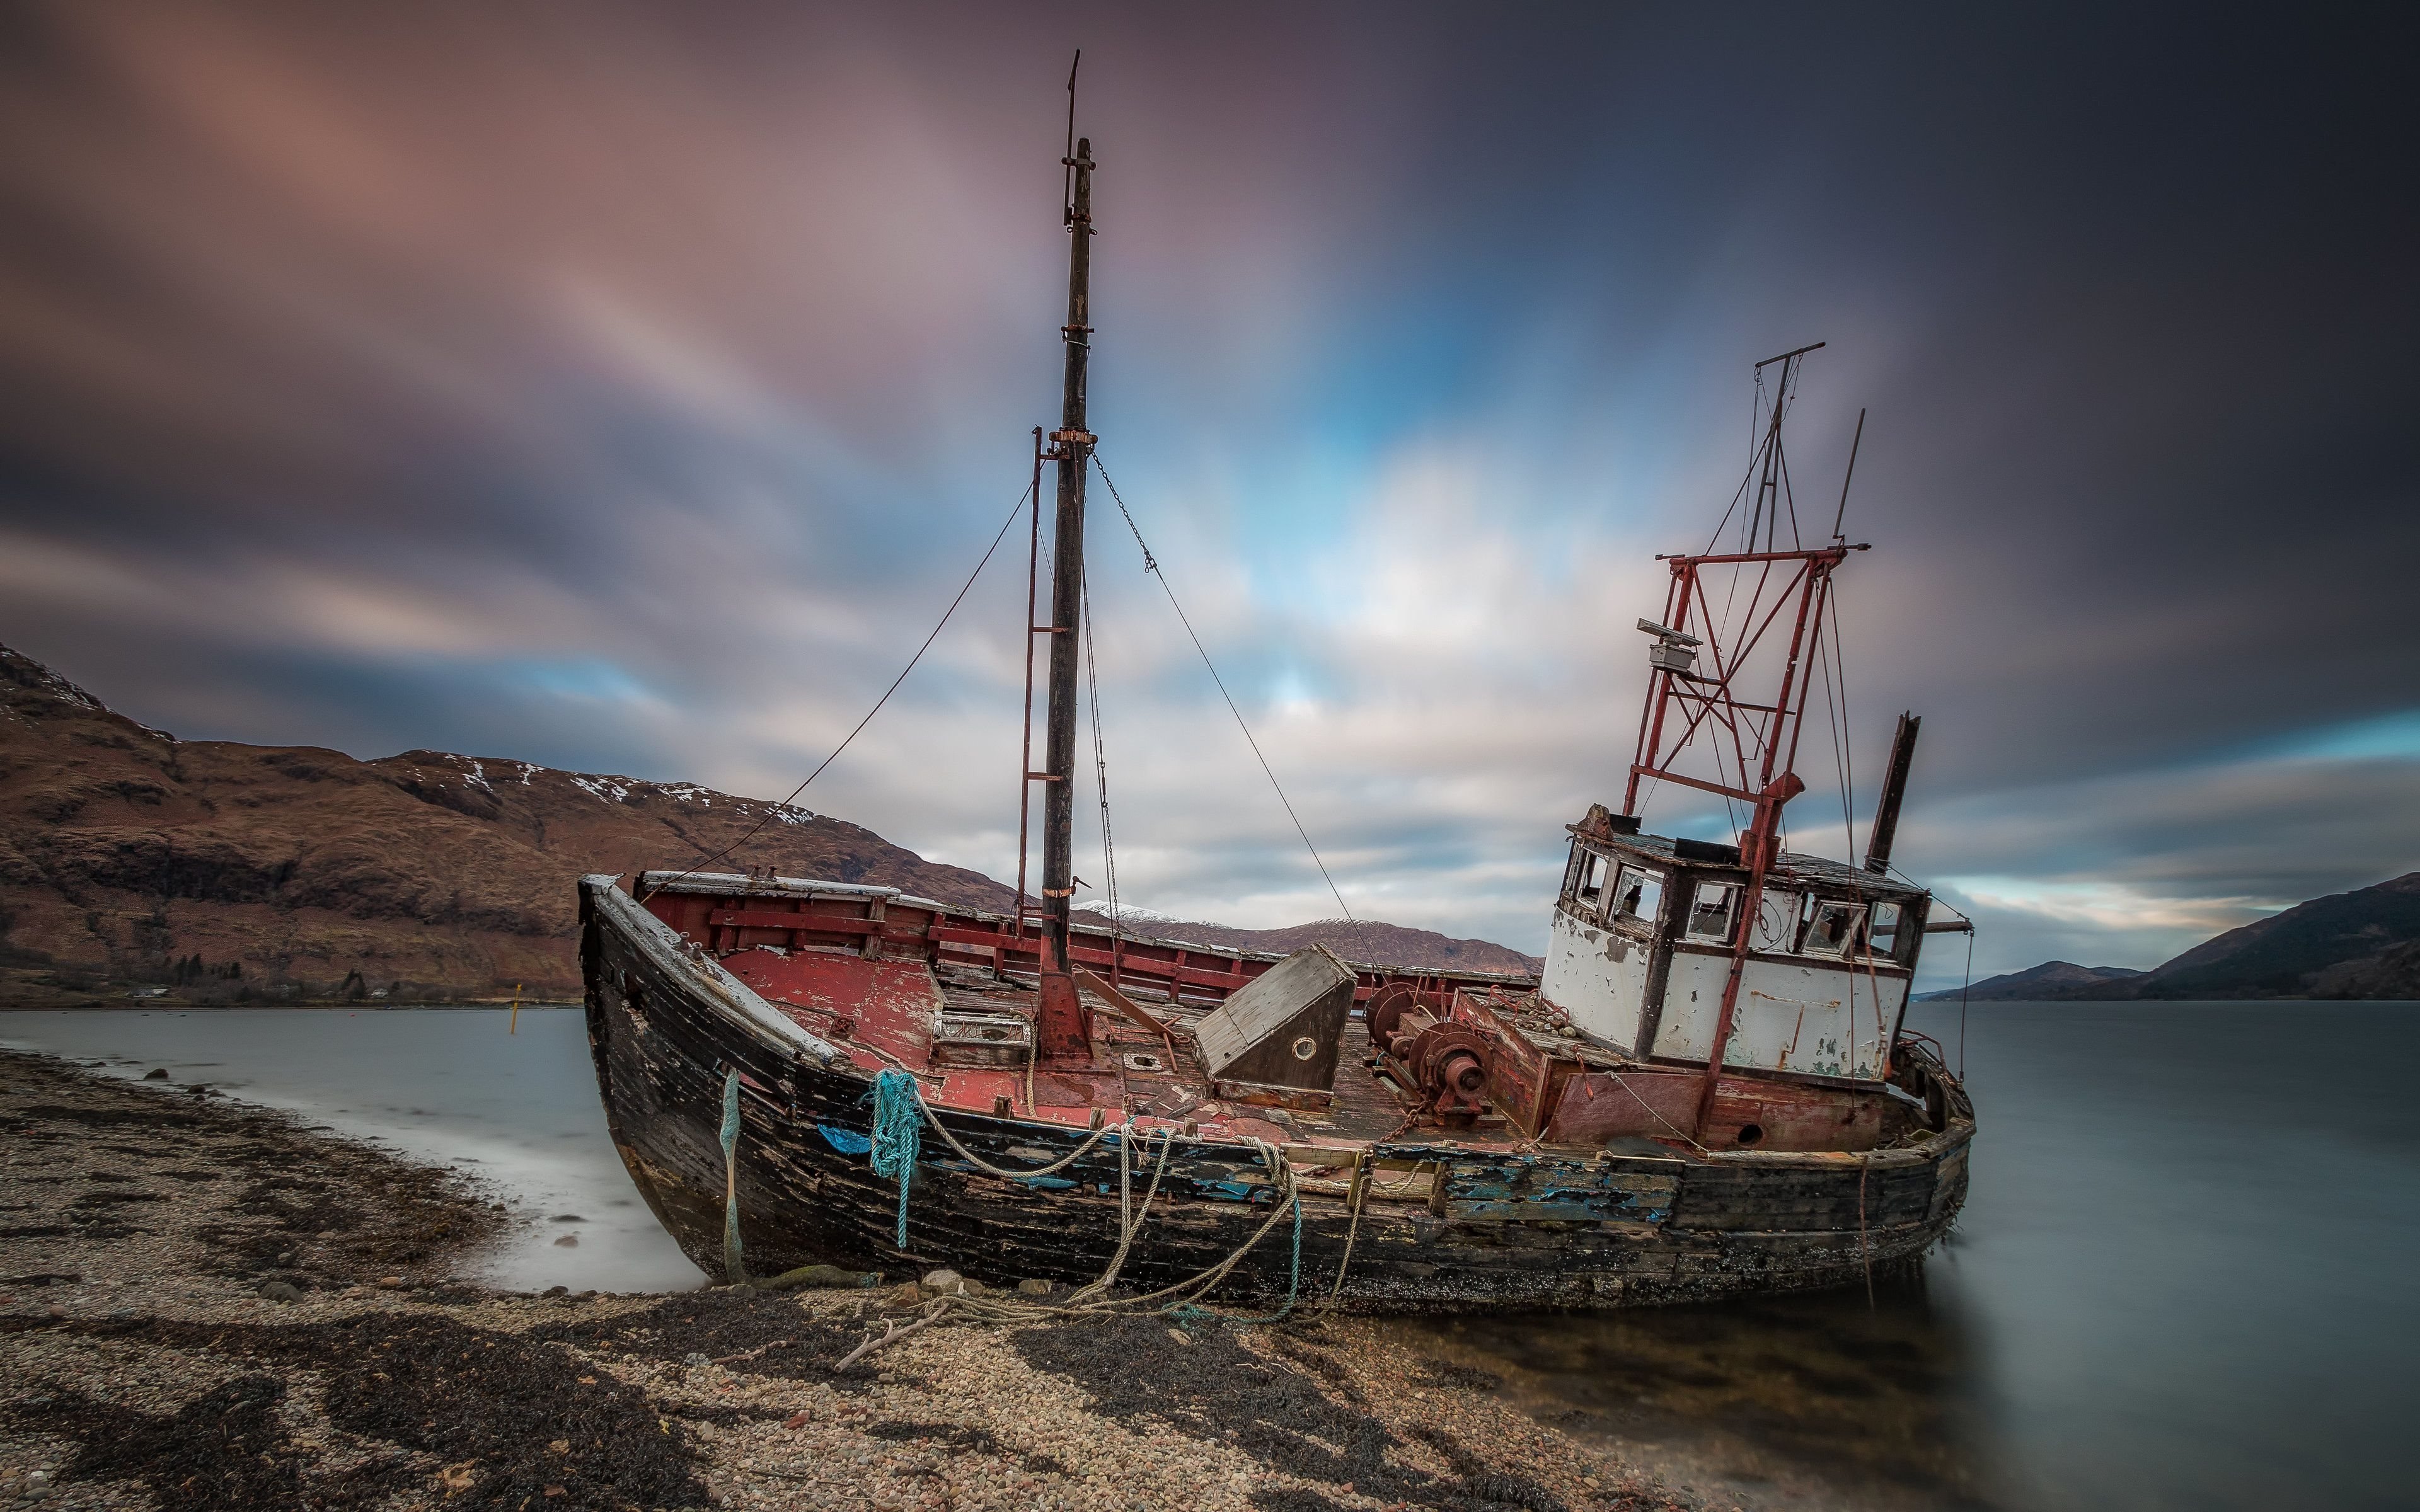 Download wallpapers shipwreck, isle of mull, scotland for desktop with ...